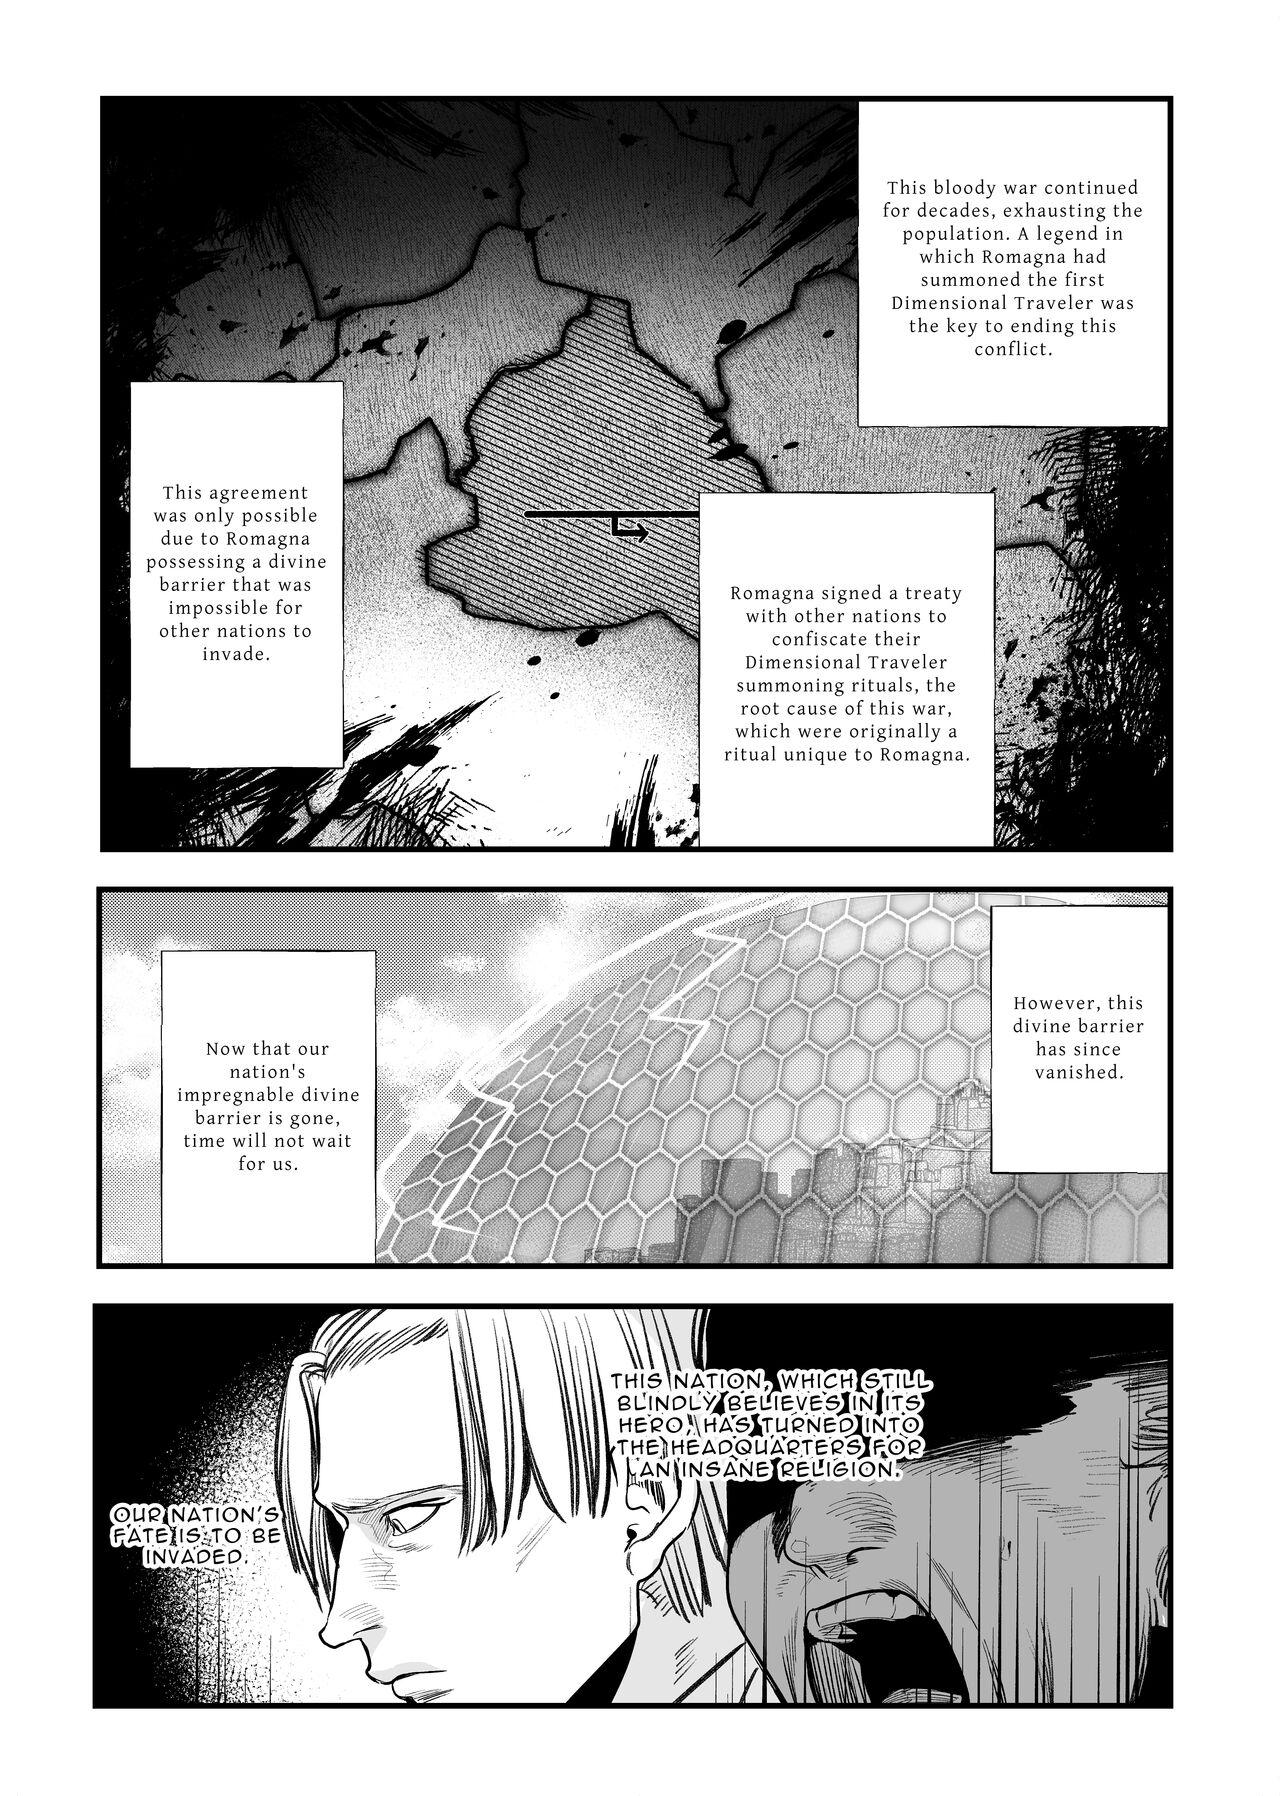 Lesbiansex The Man Who Saved Me on my Isekai Trip was a Killer... 2 - Original This - Page 7